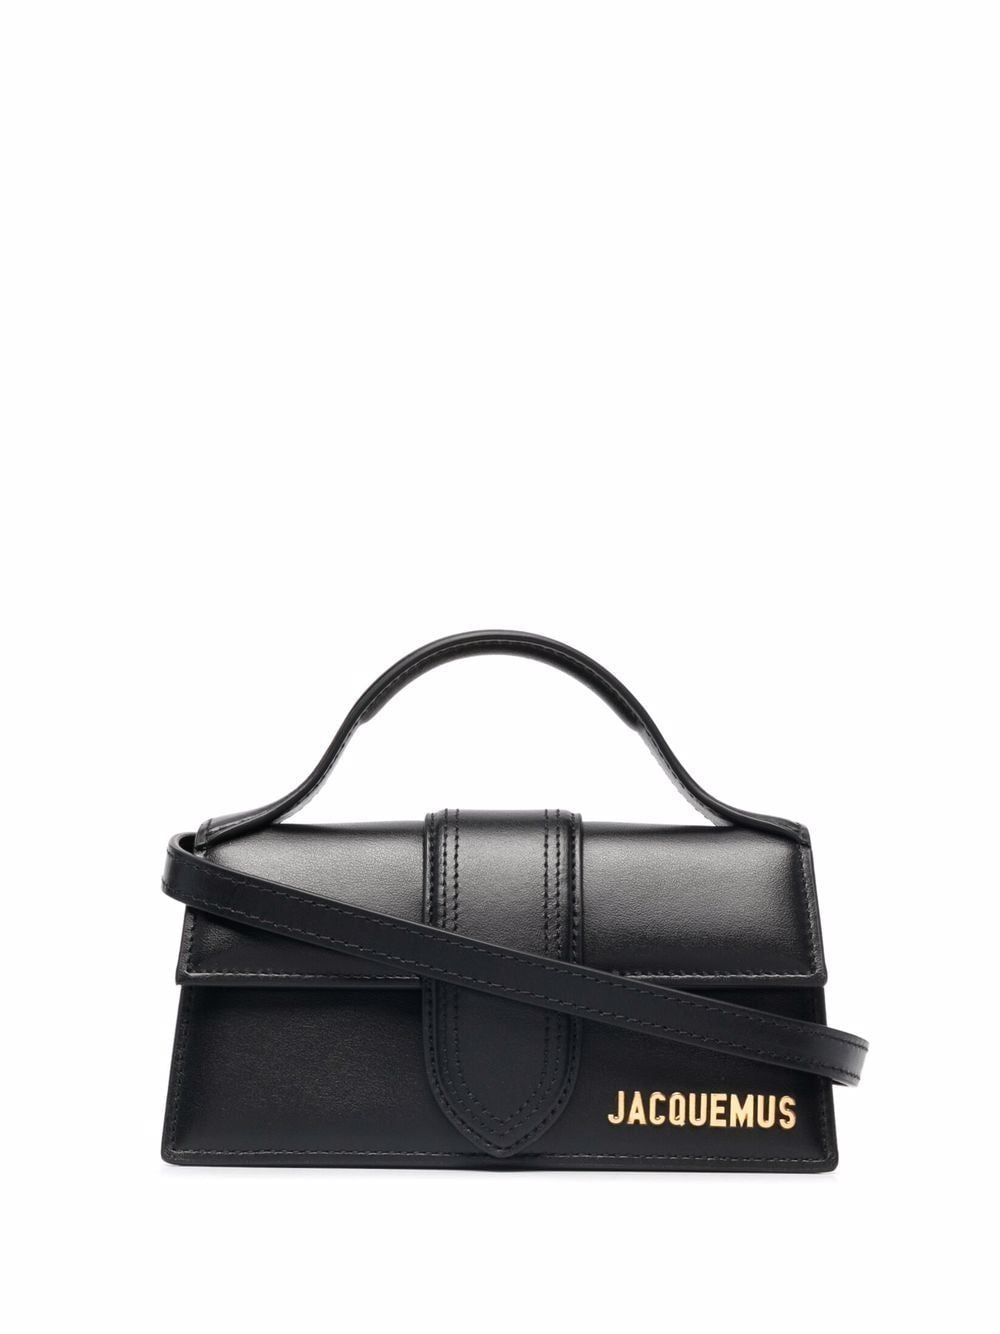 JACQUEMUS Black Leather Tote Handbag for Women - SS24 Collection